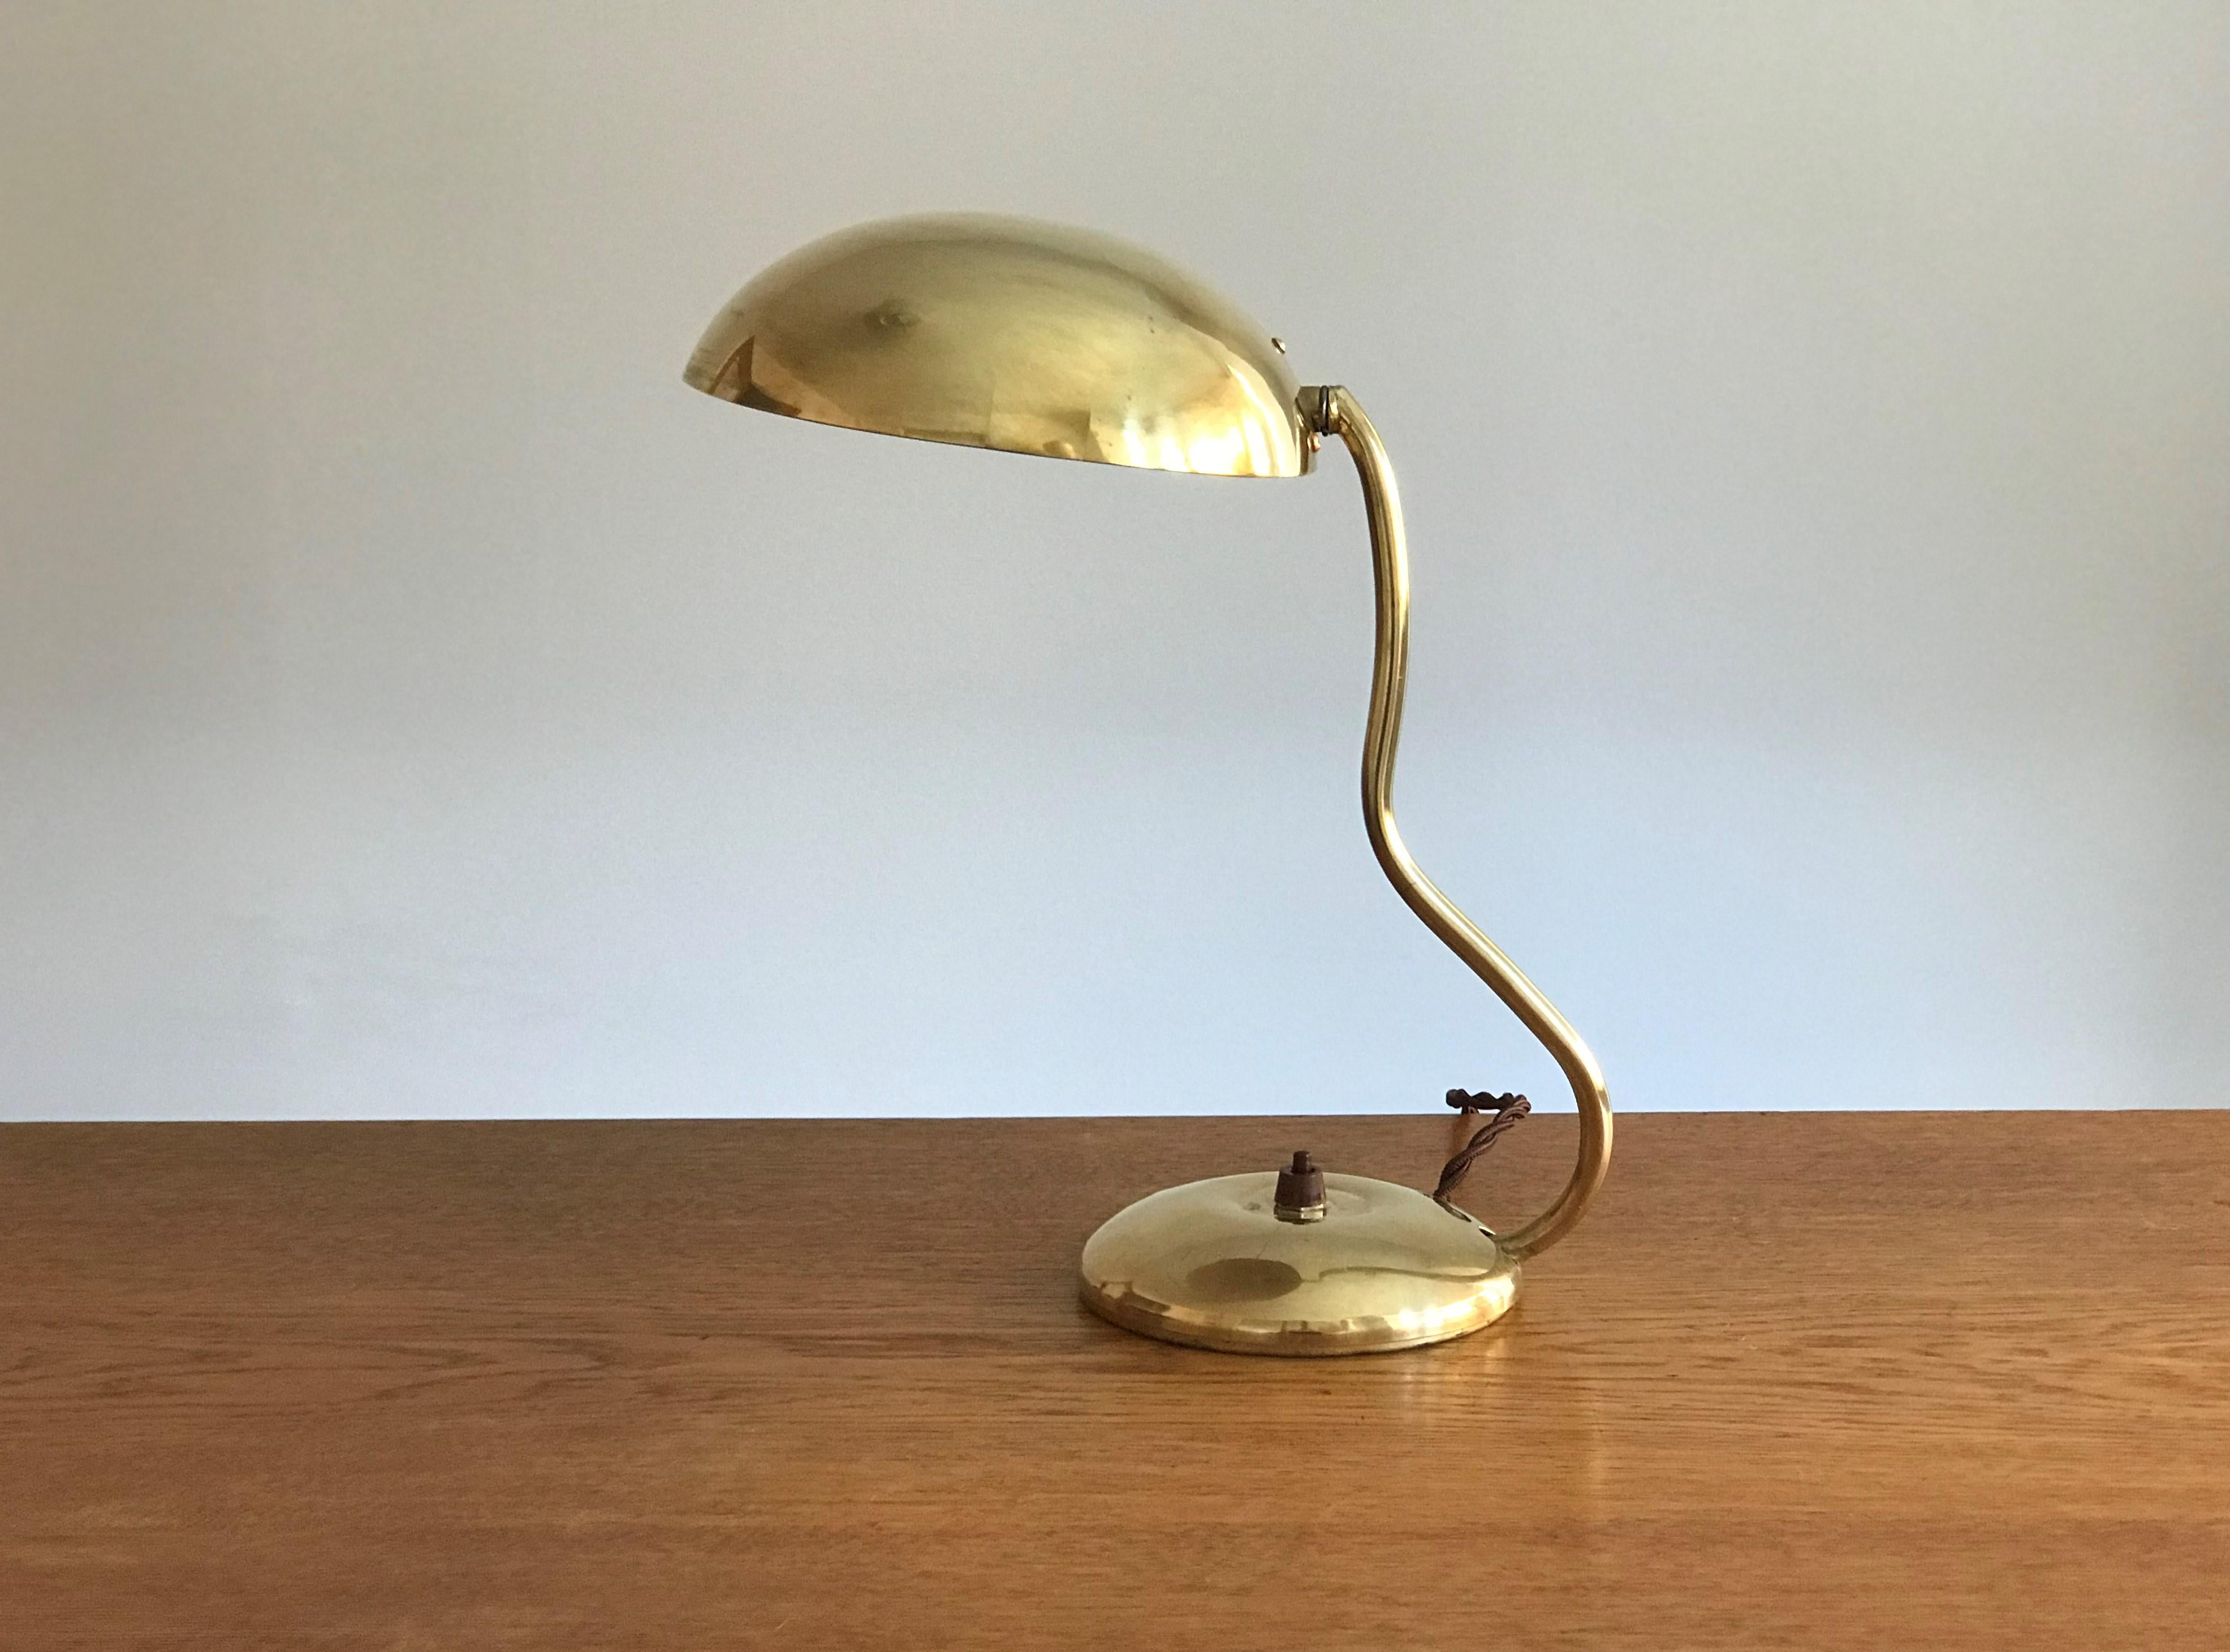 A modernist organic design table lamp. Executed by Valinte OY and marked with producers stamp. Brass on enamel, bakelite, and fabric cord. Positions adjustable. 

Other notable midcentury lighting designers include Paavo Tynell, Alvar Aalto, Max